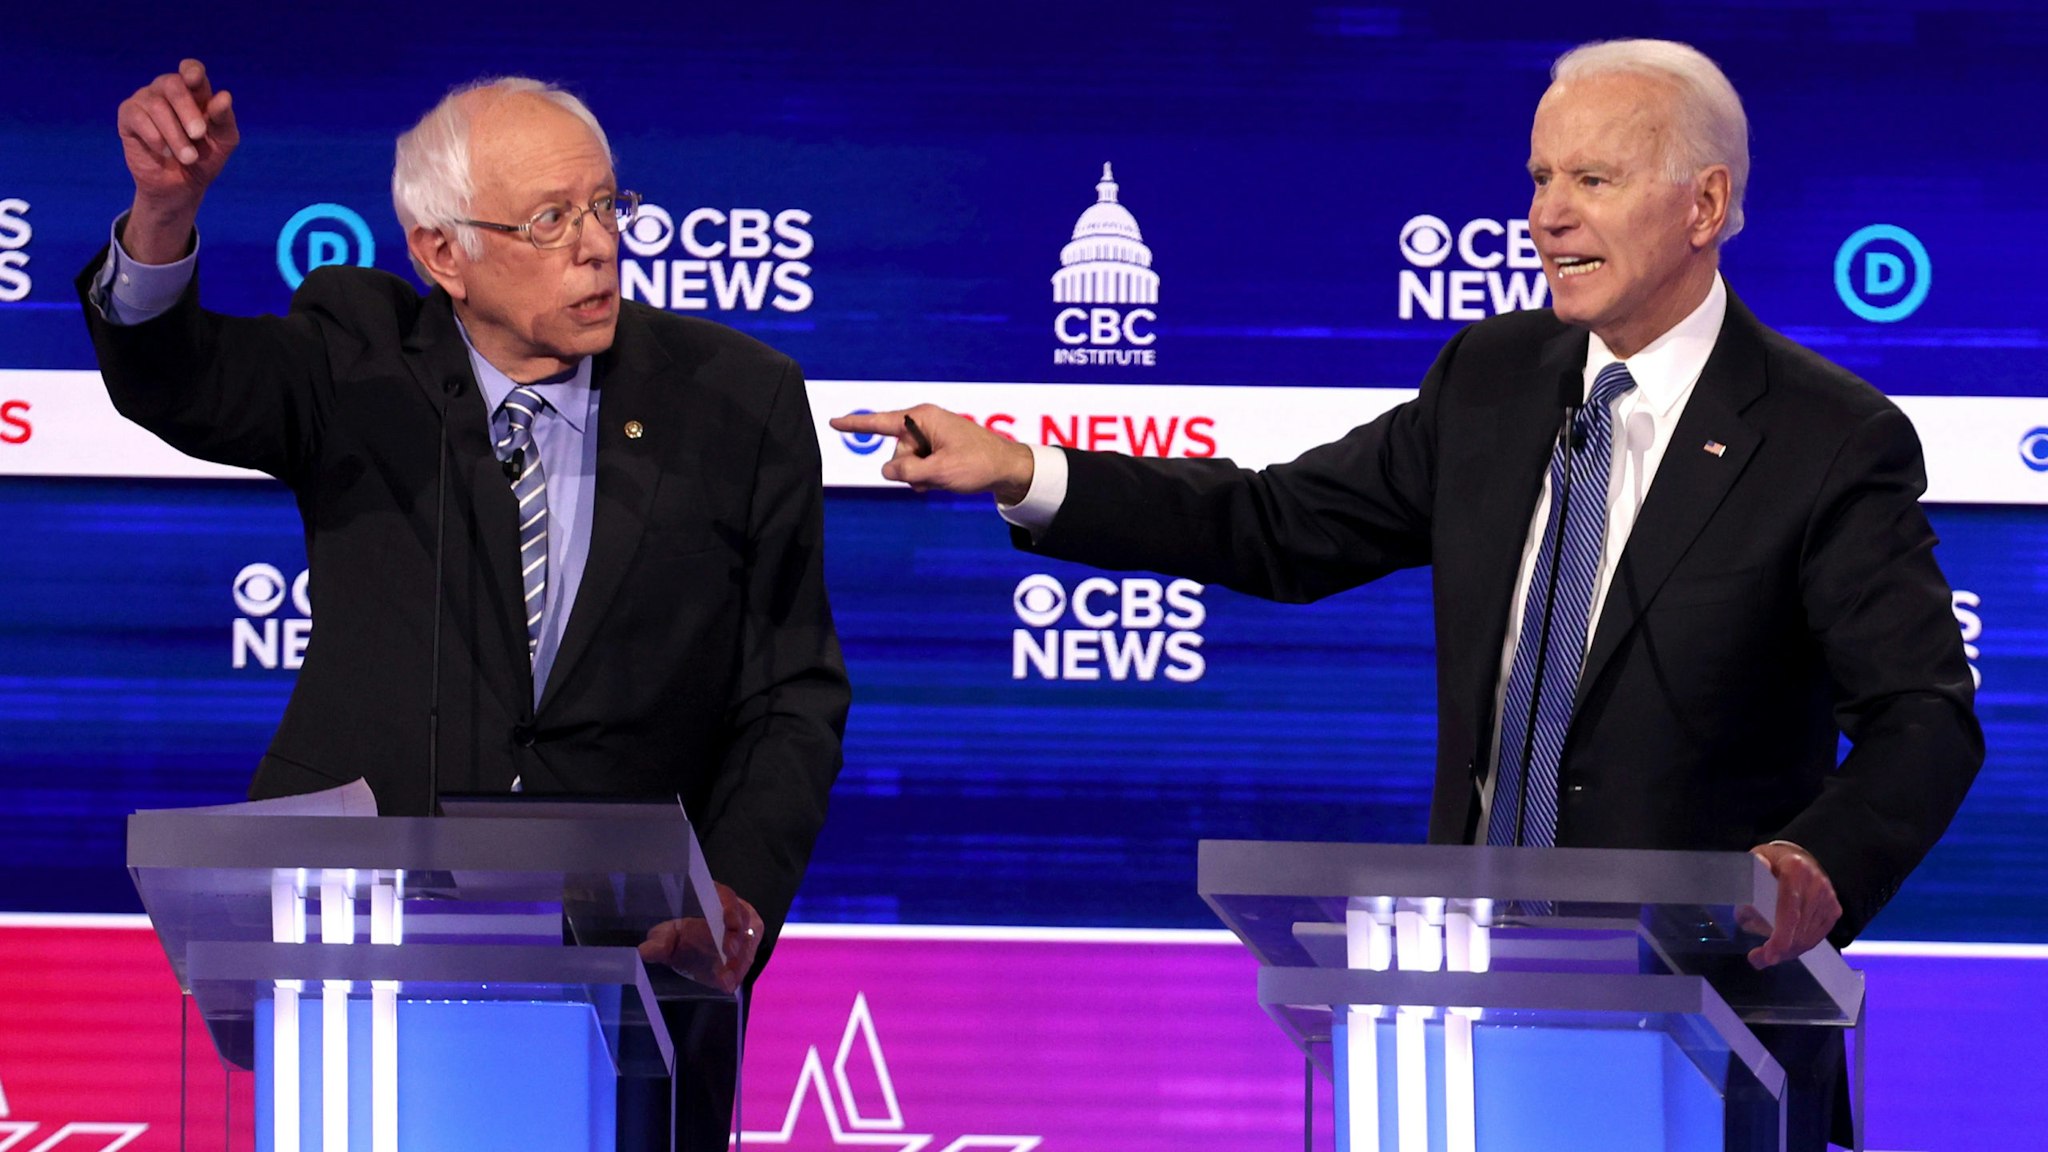 CHARLESTON, SOUTH CAROLINA - FEBRUARY 25: Democratic presidential candidate former Vice President Joe Biden speaks as Sen. Bernie Sanders (I-VT) (L) looks on during the Democratic presidential primary debate at the Charleston Gaillard Center on February 25, 2020 in Charleston, South Carolina. Seven candidates qualified for the debate, hosted by CBS News and Congressional Black Caucus Institute, ahead of South Carolina’s primary in four days.